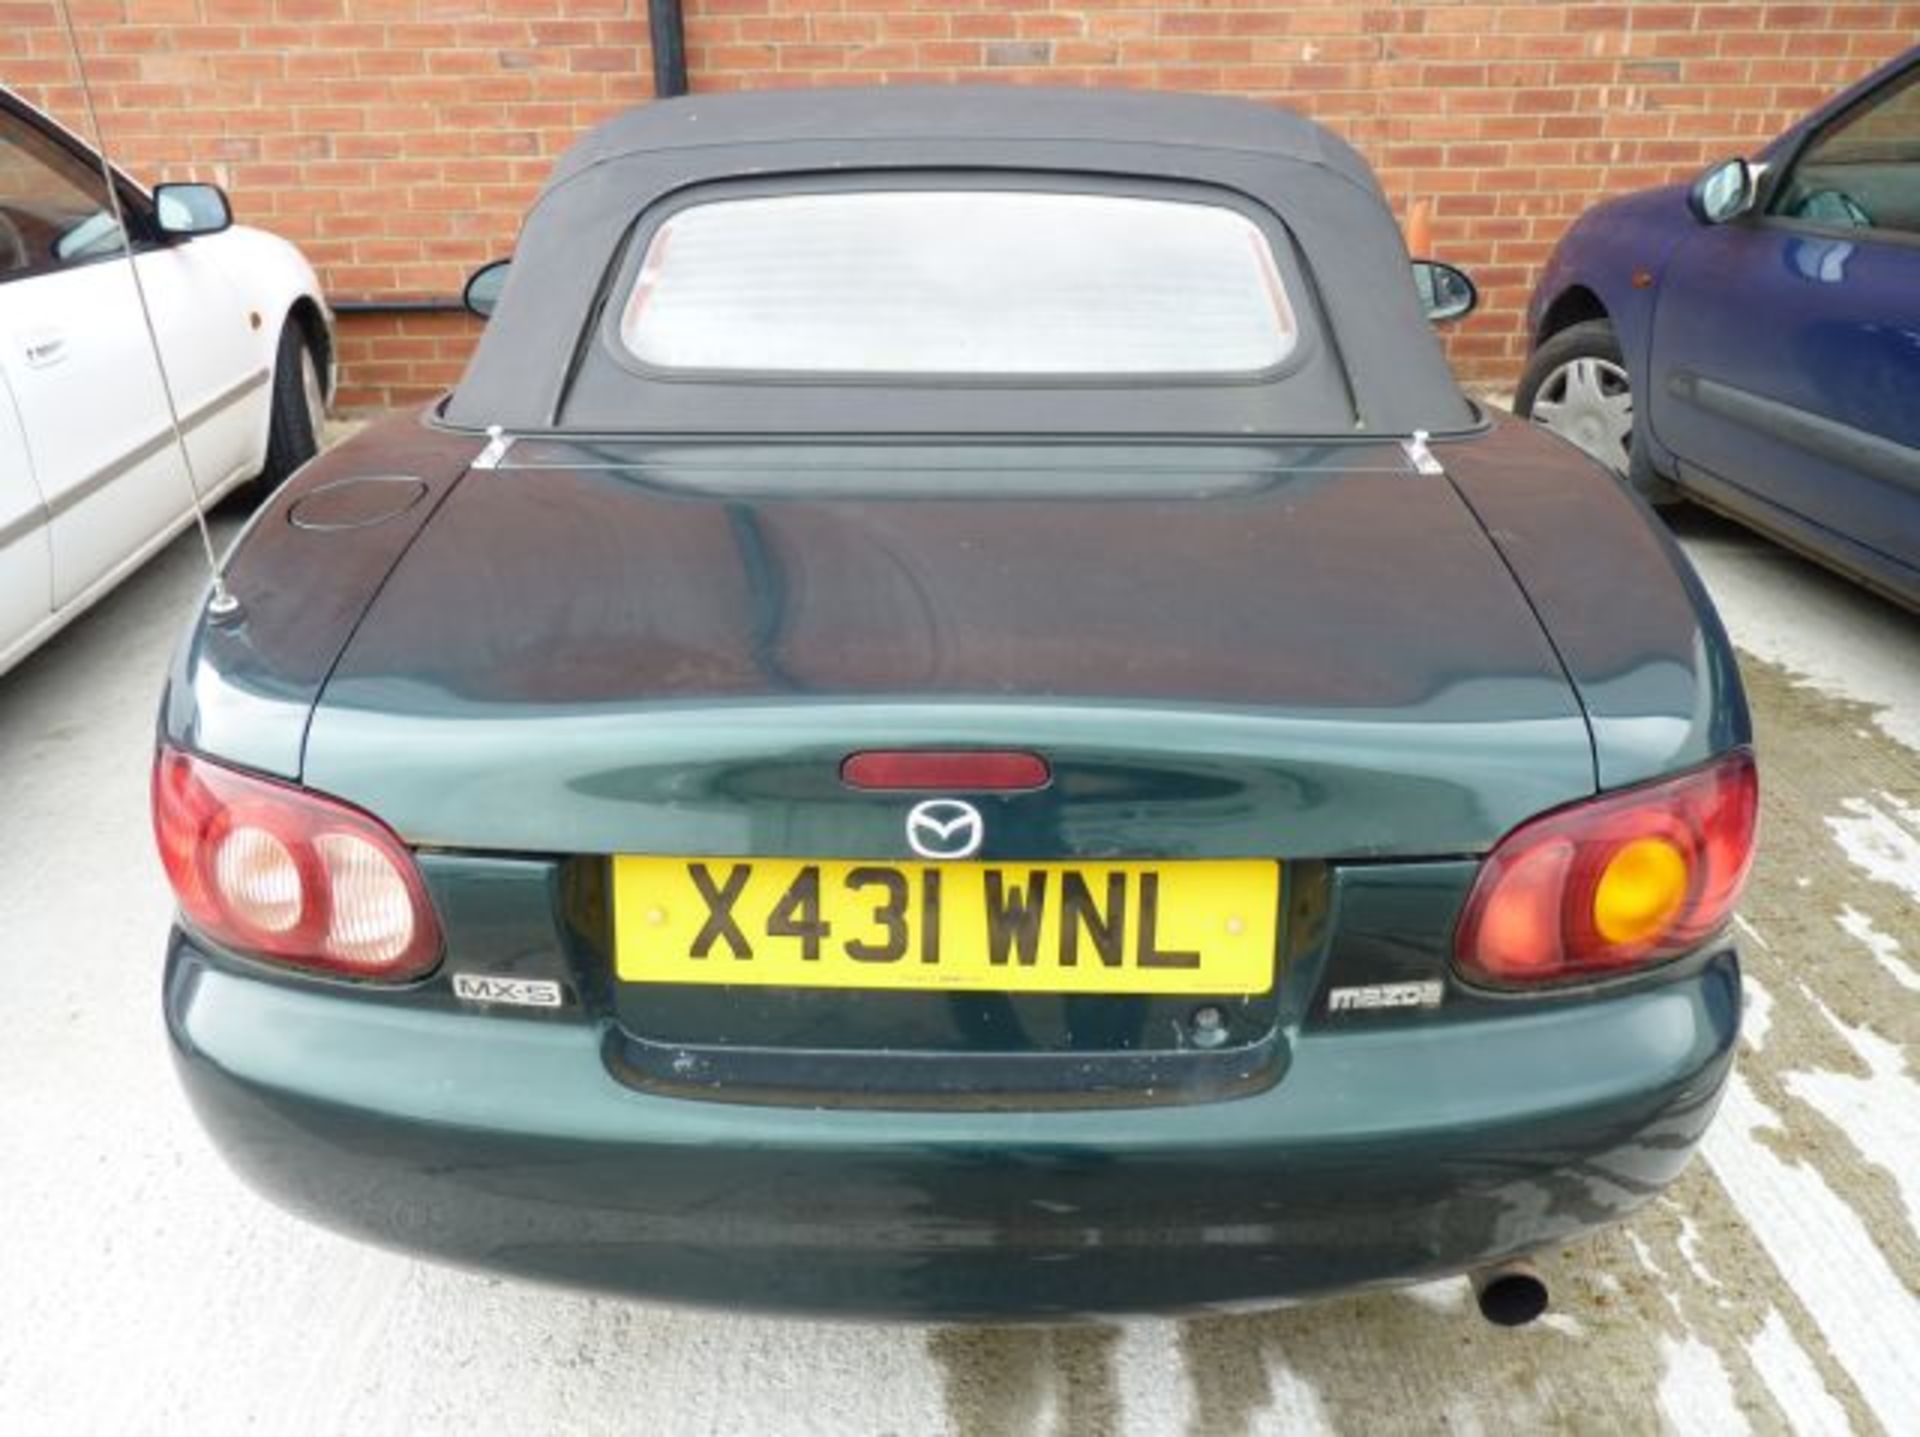 X PLATE MAZDA MX5 SOFT-TOP CONVERTIBLE; 1.8 PETROL; 107163 RECORDED MILES; REG X431 WNL; TAX - Image 3 of 7